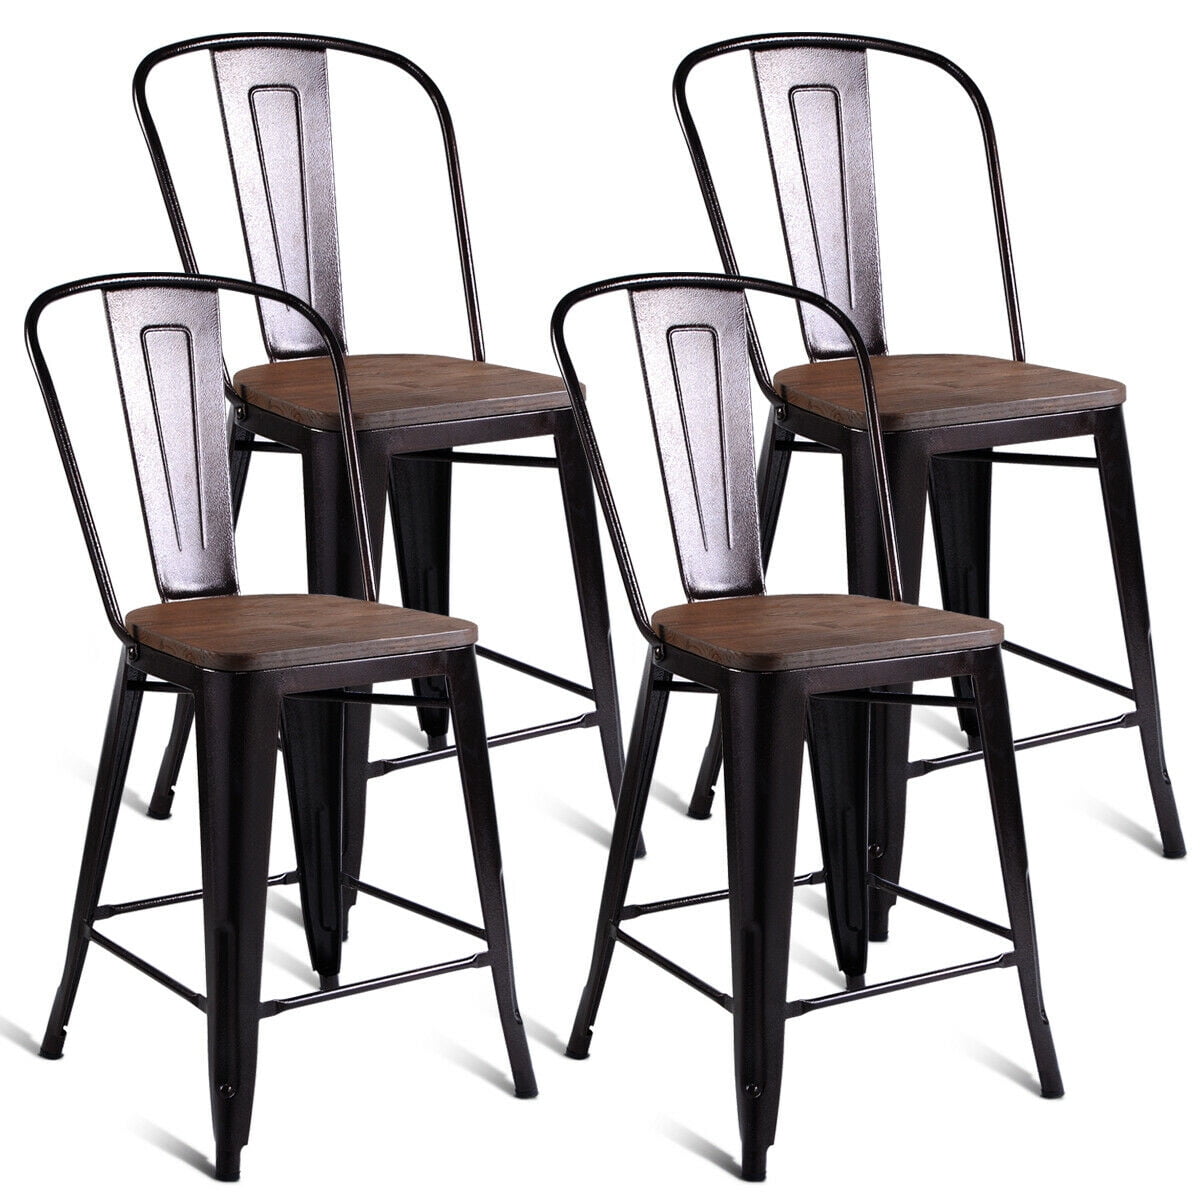 costway copper set of 4 metal wood counter stool kitchen dining bar chairs  rustic  walmart